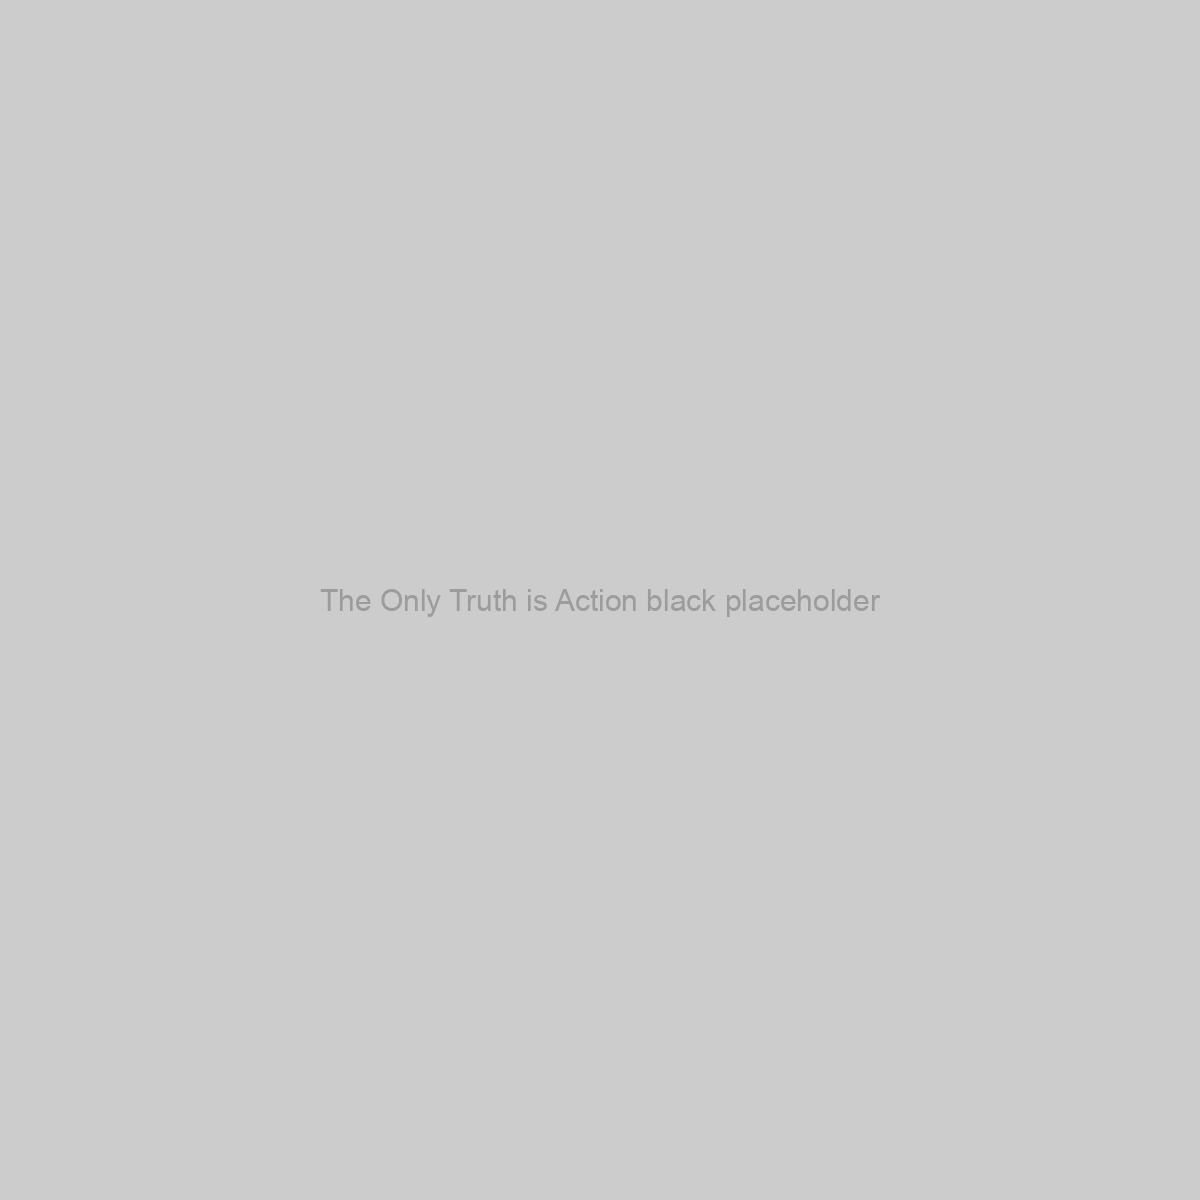 The Only Truth is Action black Placeholder Image